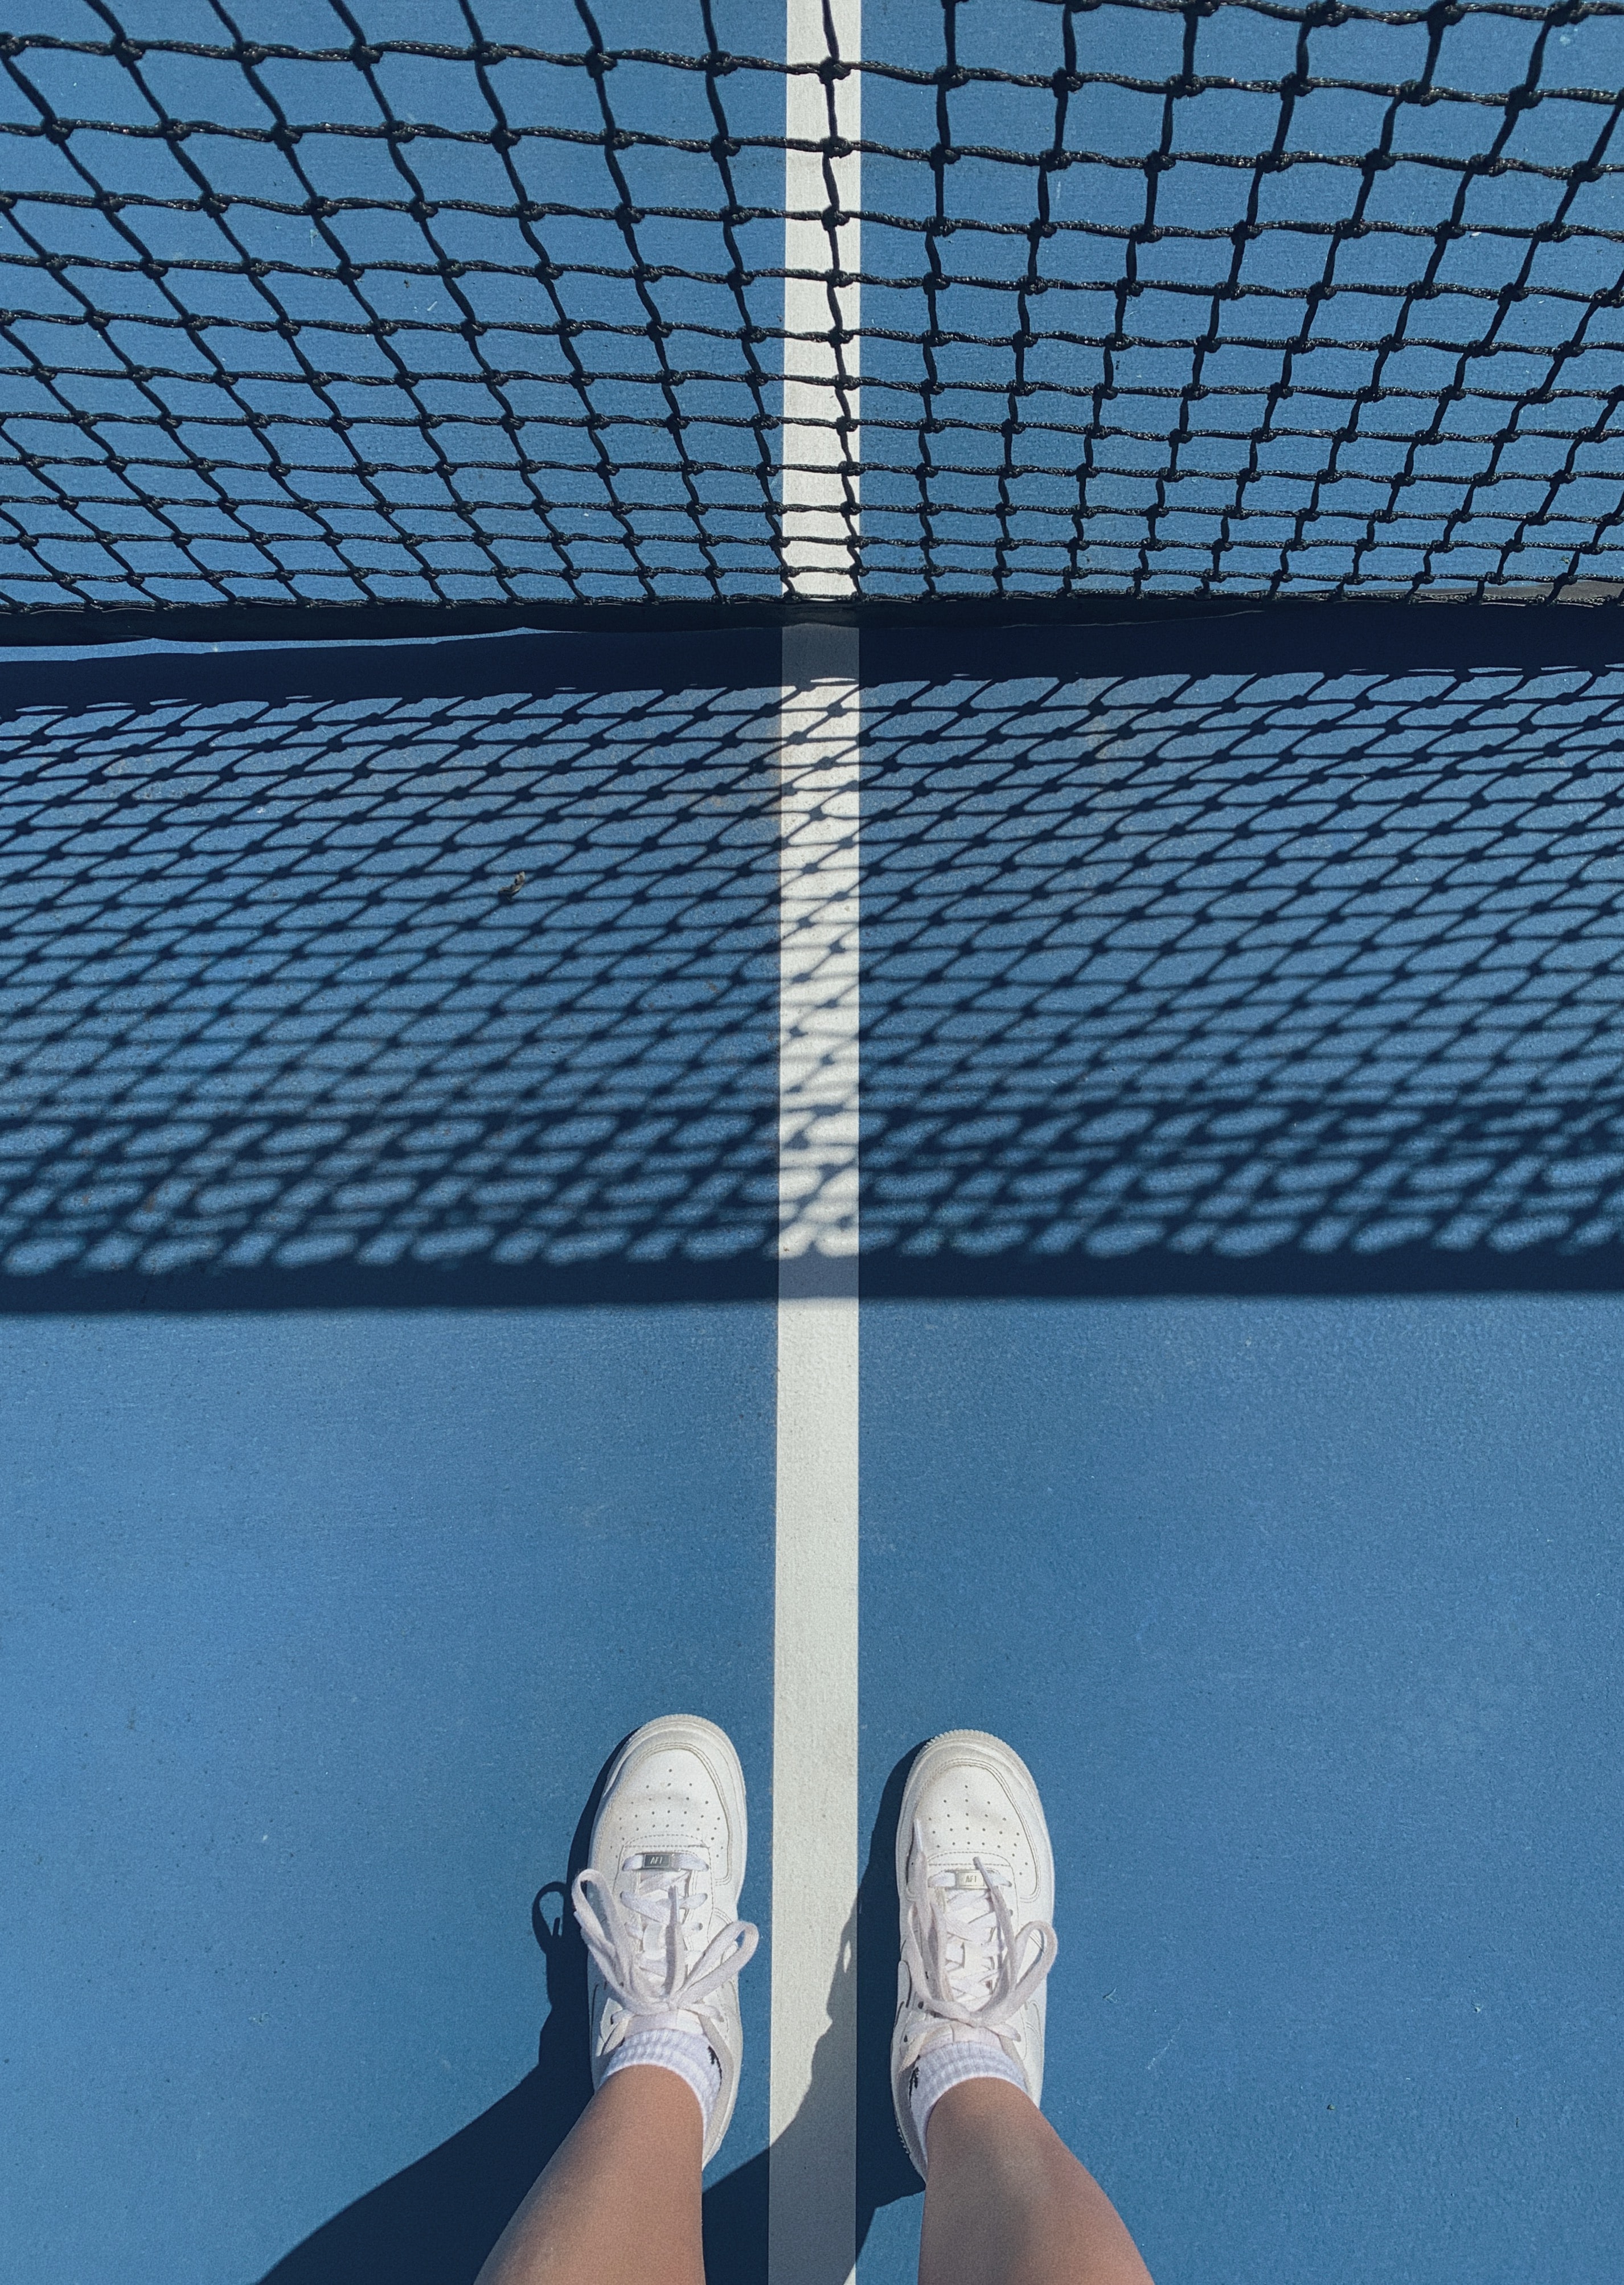 Images & Pictures tennis court, miscellanea, sneakers, grid Tennis